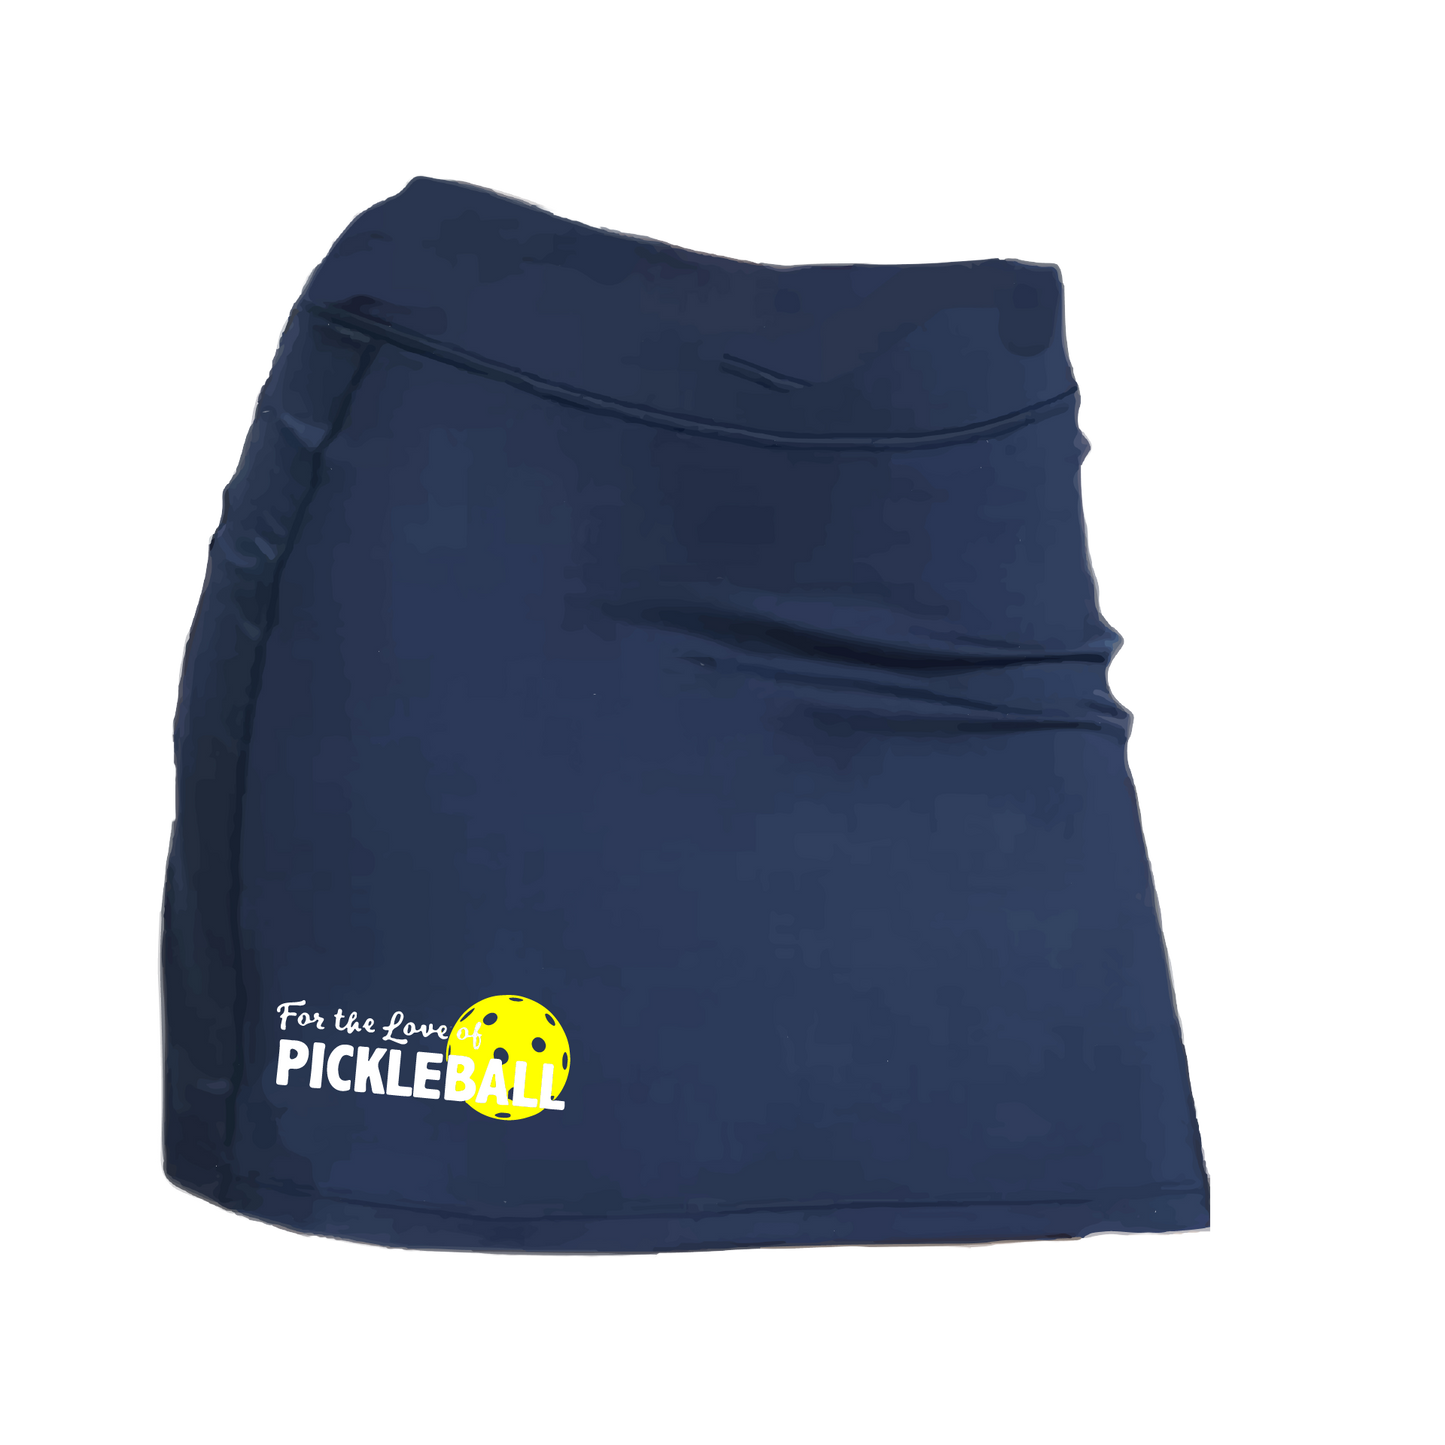 Skort Pickleball Design: For the Love of Pickleball - Women’s core active jersey-knit skort comes with built-in shorts made out of a poly-spandex blend.  Feel secure knowing that no matter how strenuous the exercise, the skort will remain in place (it won’t ride up!). The fabric is breathable, featuring Dri-Works wicking technology. As you perspire, it allows your skin to breathe while simultaneously absorbing the moisture, keeping you dry and comfortable.